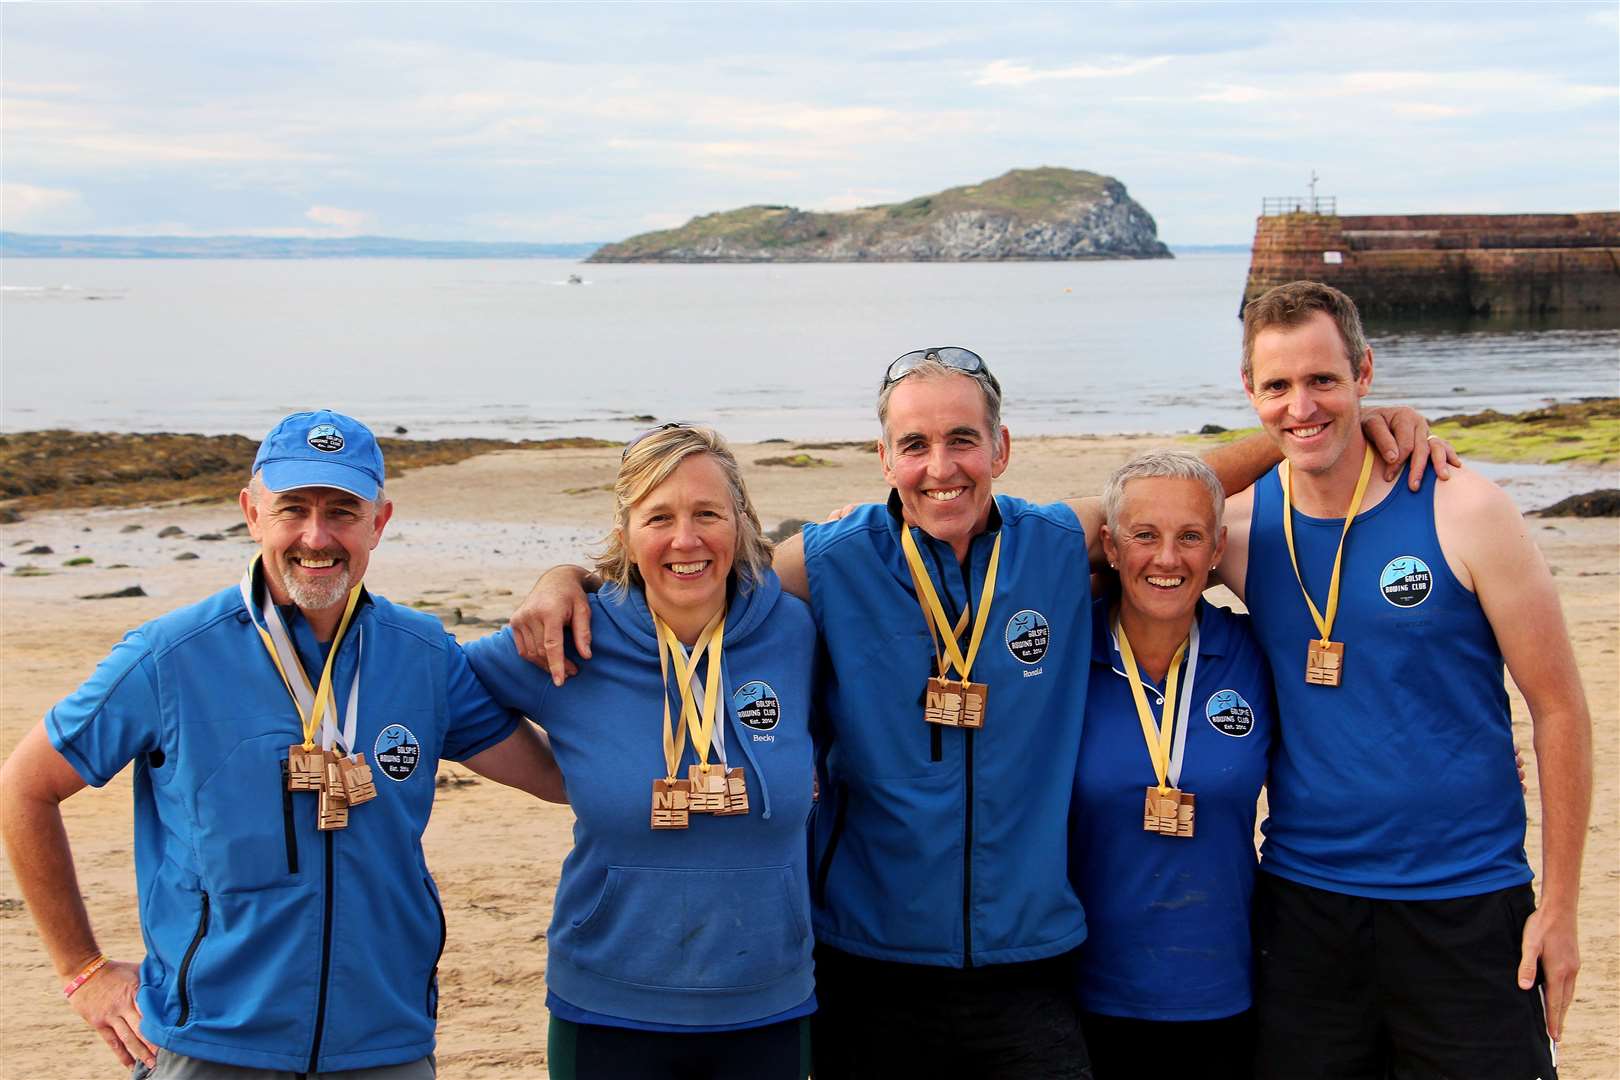 The club came away with four medals: a bronze in men’s 45+; two silvers in women’s 45+ and mixed decades; and a gold in the mixed open. From left, Ian Sutherland, Becky Shaw, Ronald Mackay, Carene Ross and Neil Jacobs. Picture: David Richardson